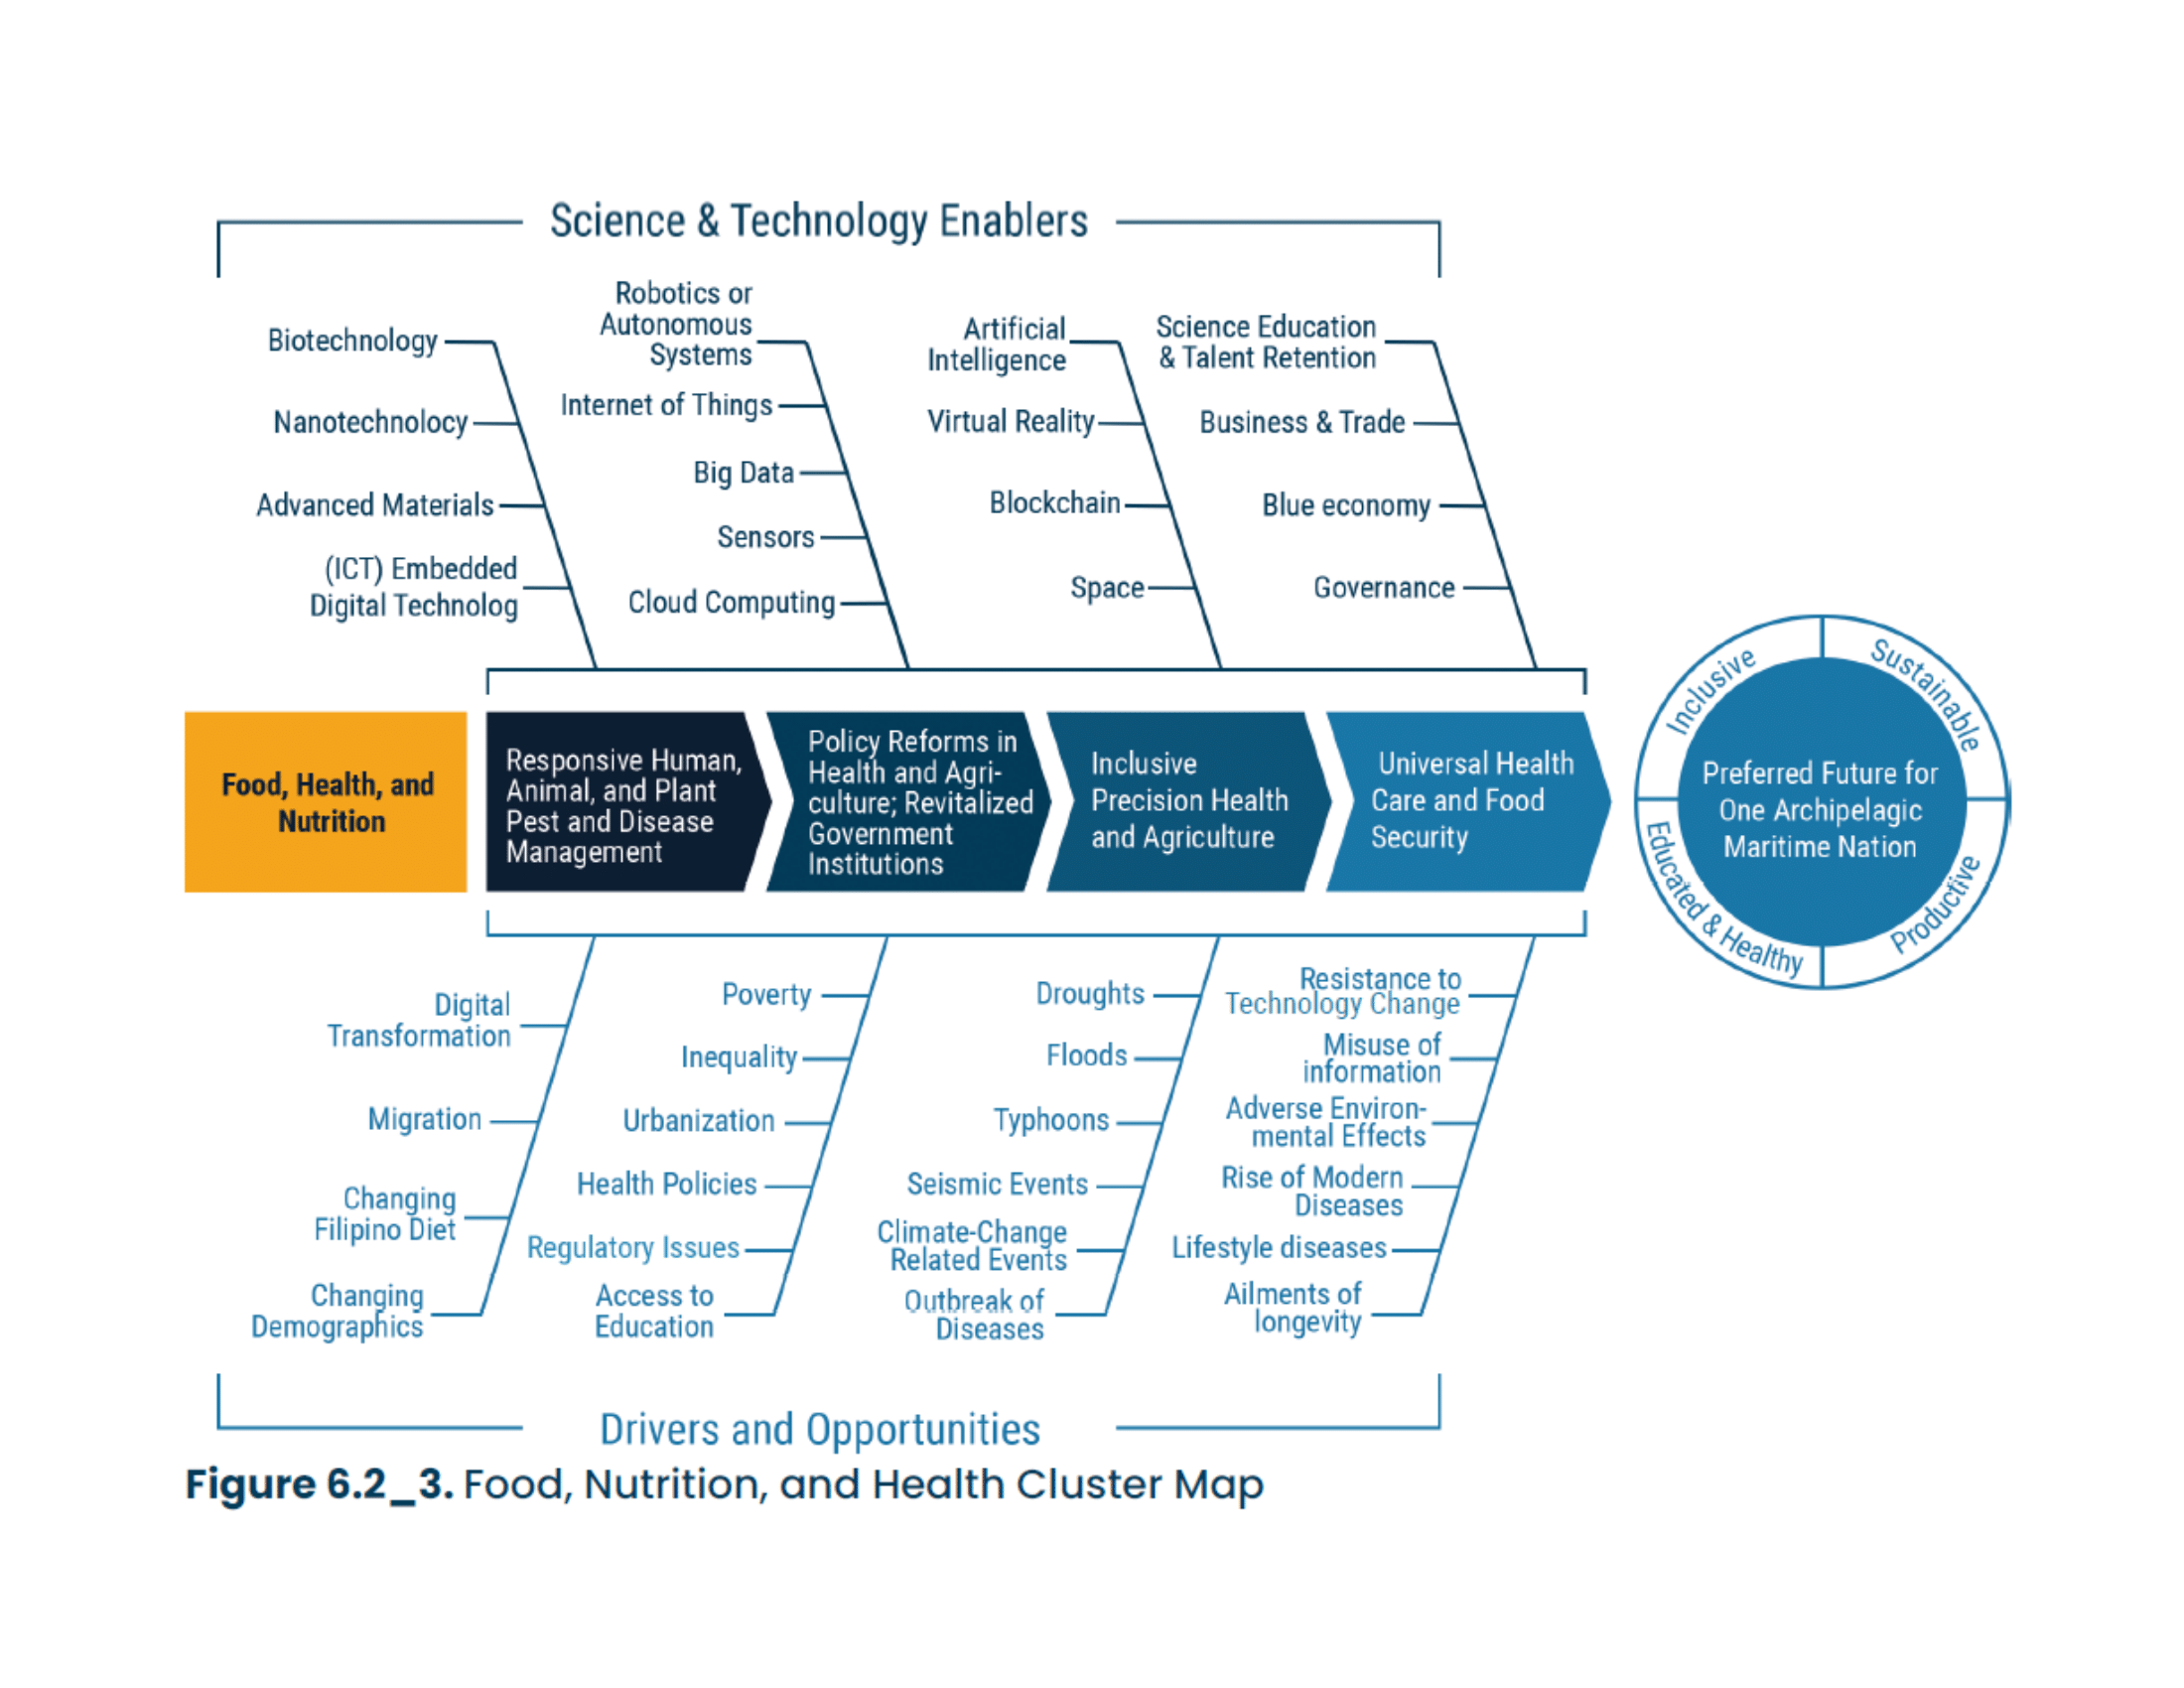 Figure 6.2 3.Food, Nutrition, and Health Cluster Road Map